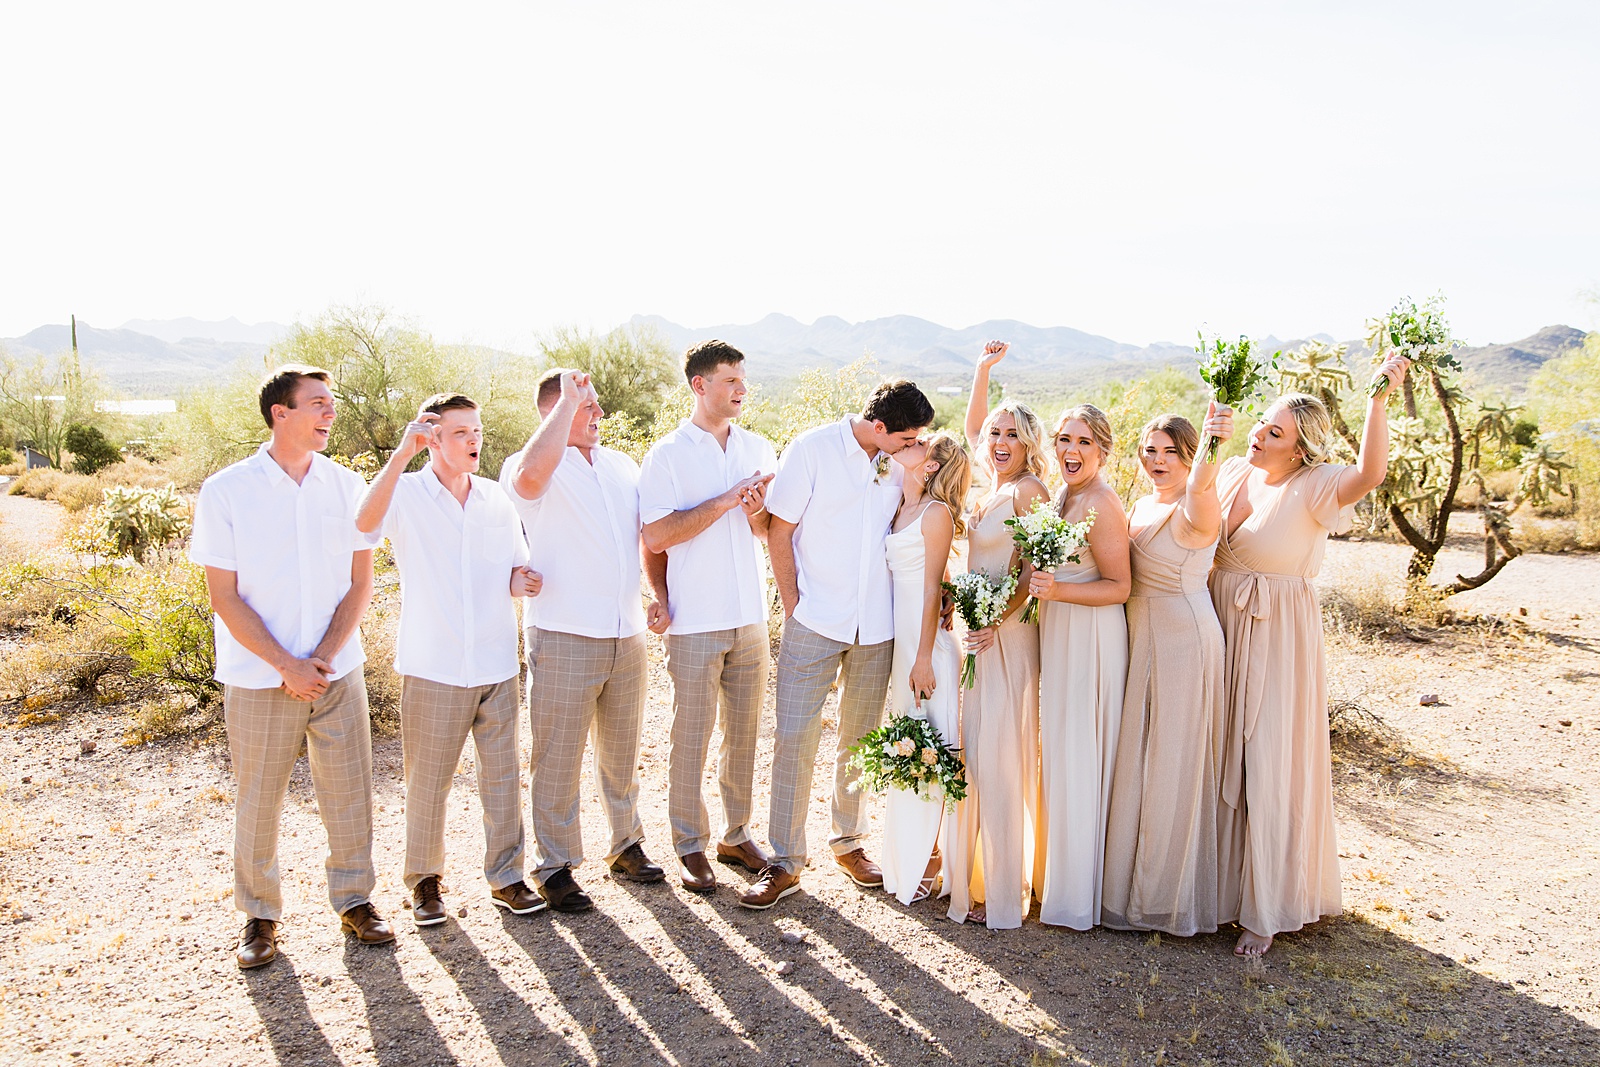 Bridal party laughing together at Superstition Mountain Micro wedding by Lost Dutchman wedding photographer PMA Photography.